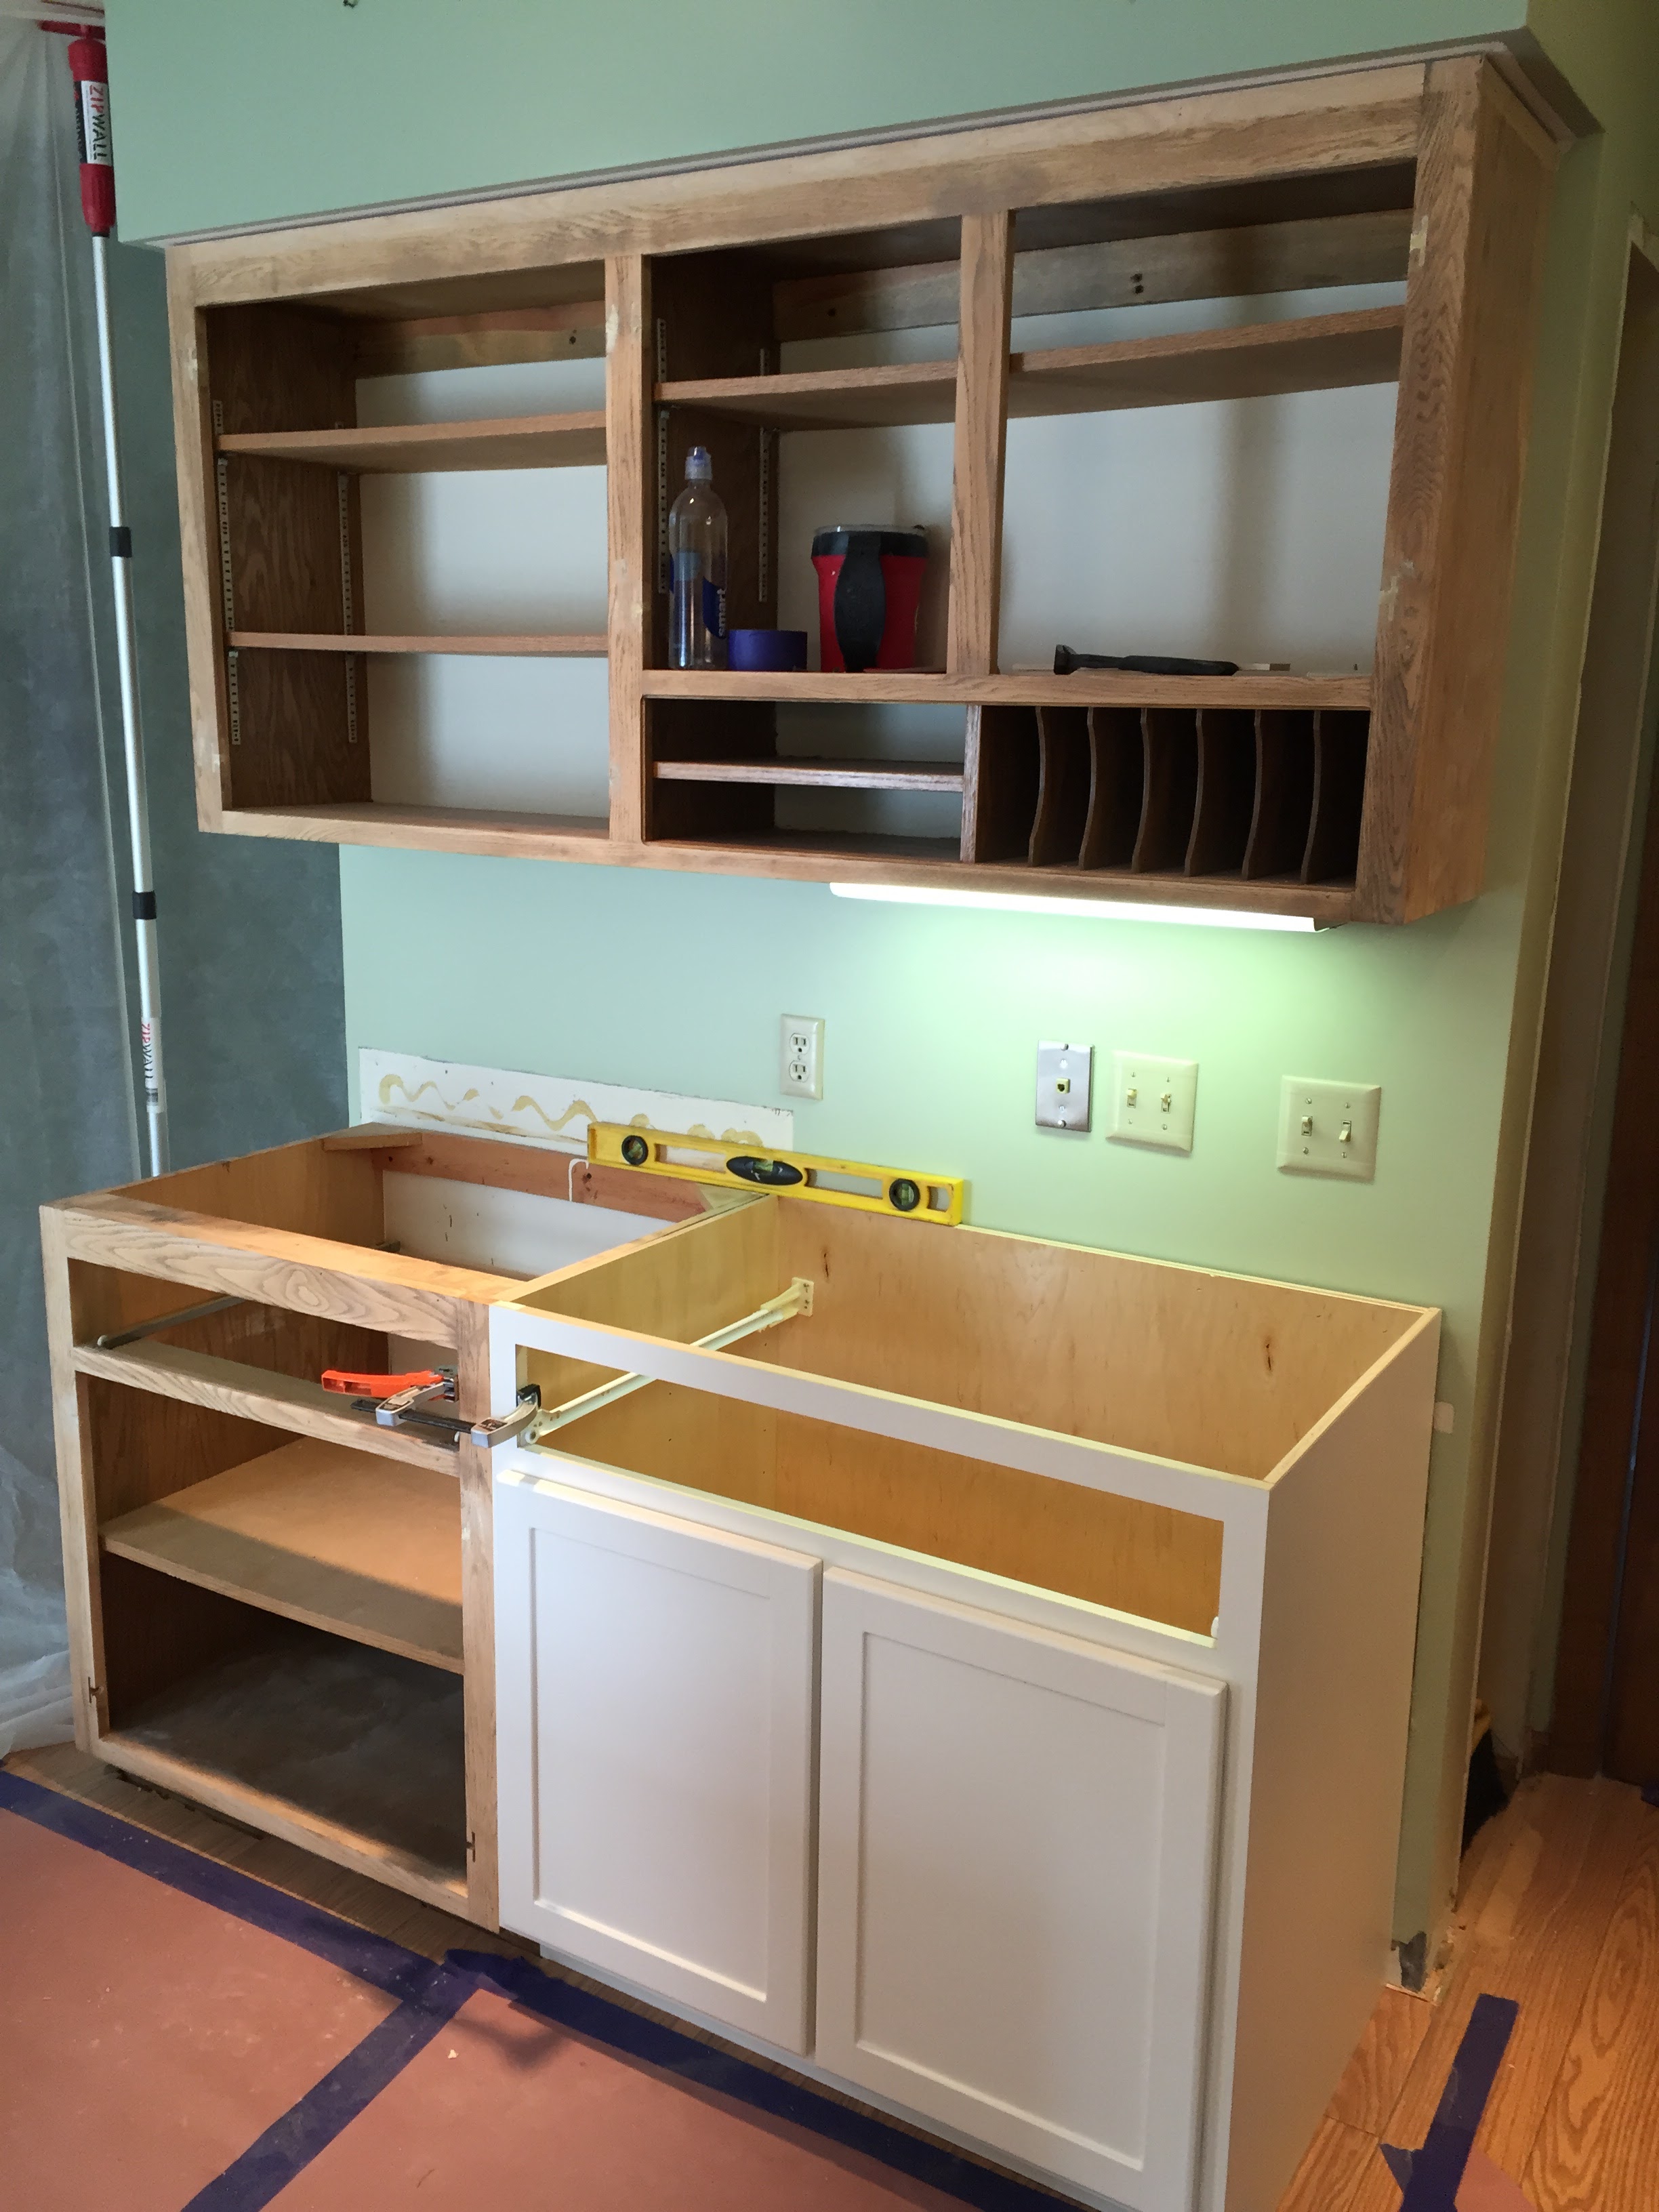 DURING - New Cabinets are installed to make the area more functional with storage rather than the unused desk